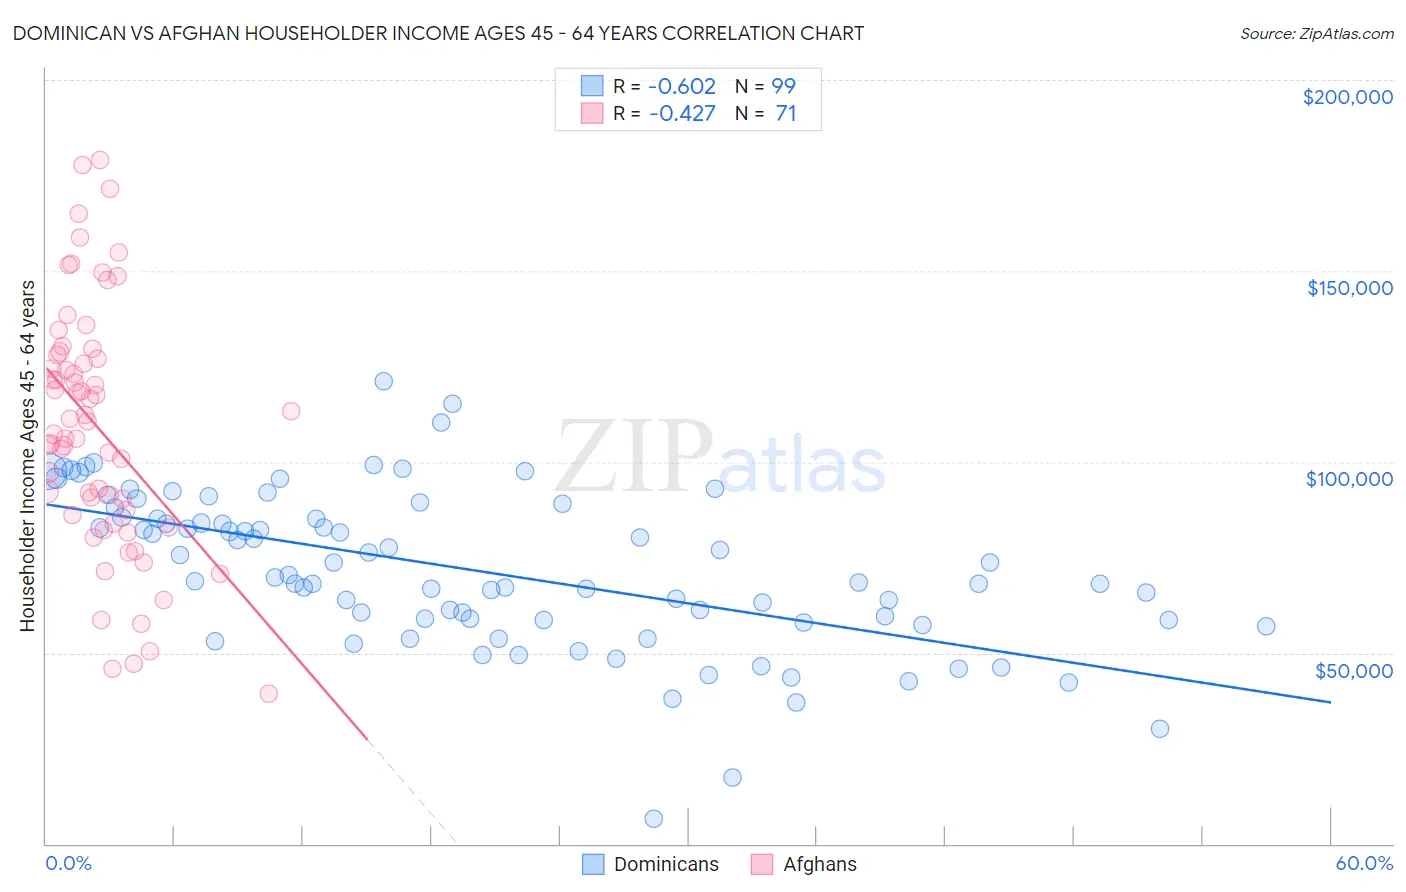 Dominican vs Afghan Householder Income Ages 45 - 64 years